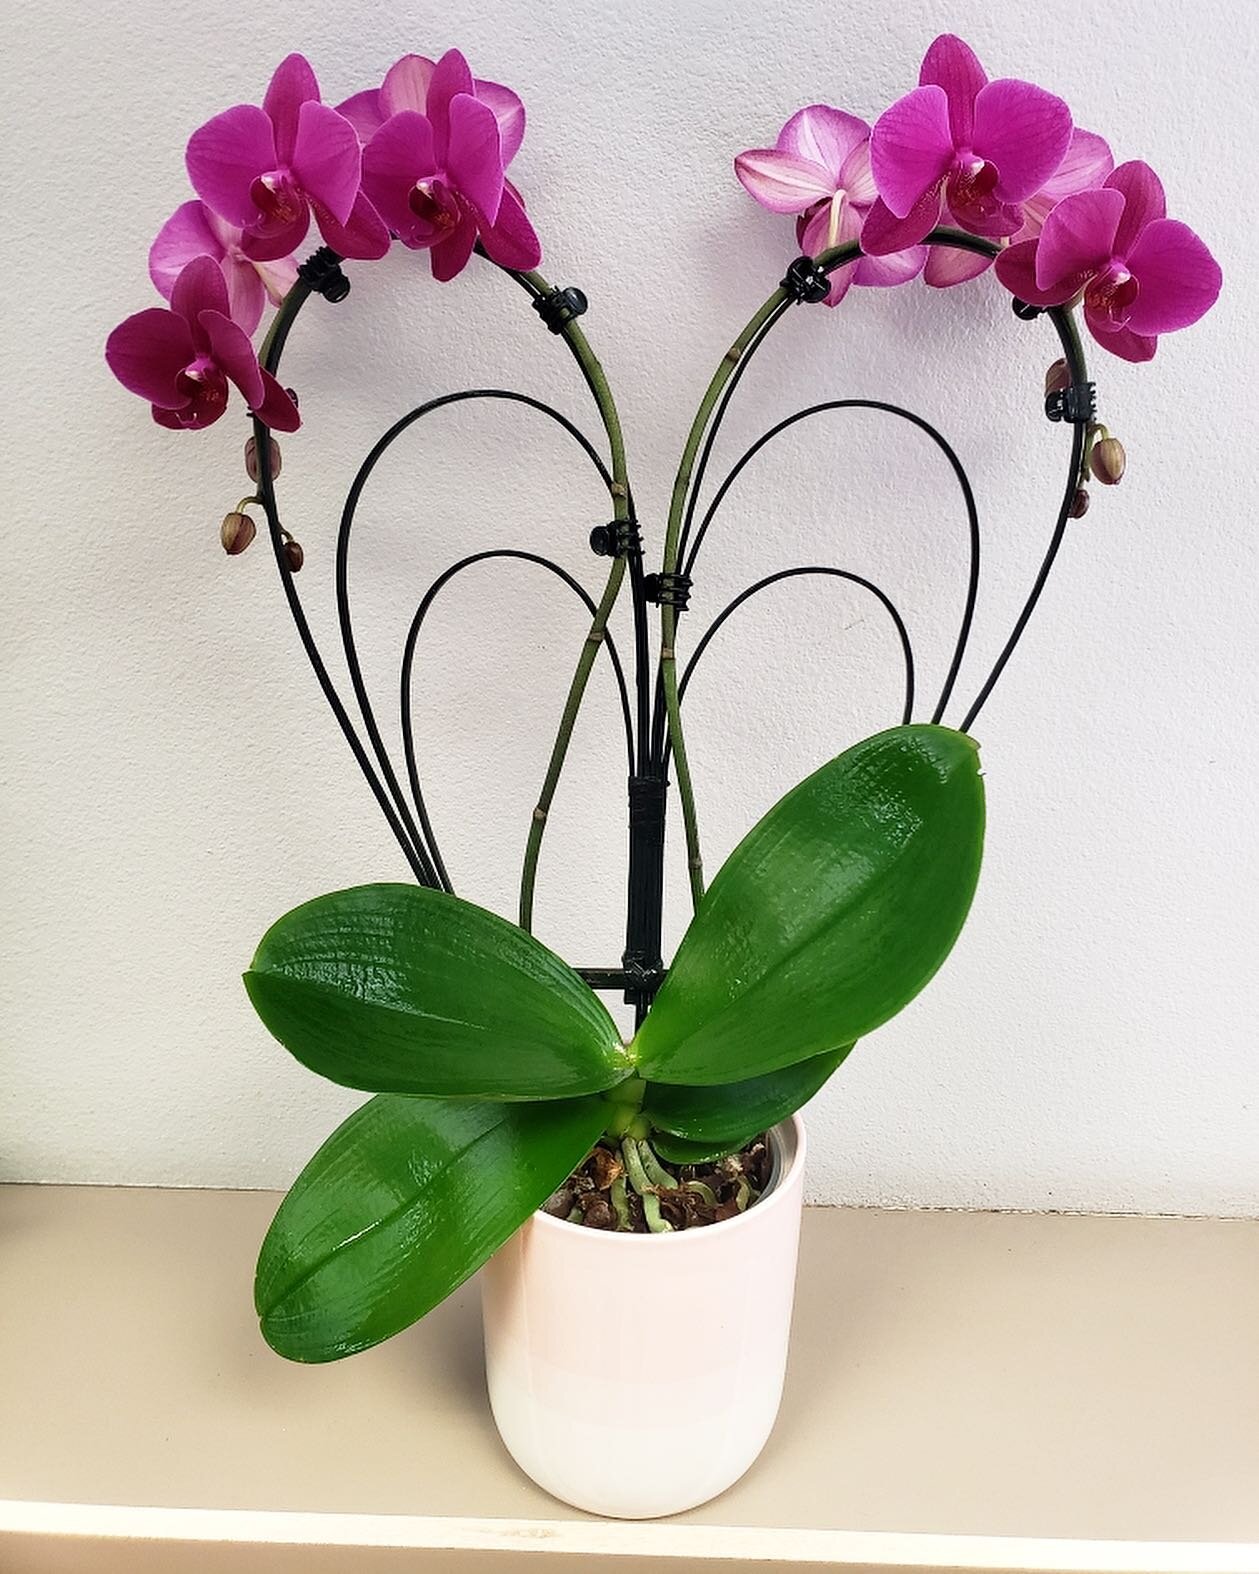 Part of our Orchid inventory includes these beauties! 🥰

This is the perfect gift for any Orchid lover. Stop by our shop and pick yours up! They&rsquo;ll run out fast! 😱

&bull;
&bull;
&bull;
&bull;

#wholesaleflowers #ocflorist #orchidsofinstagram